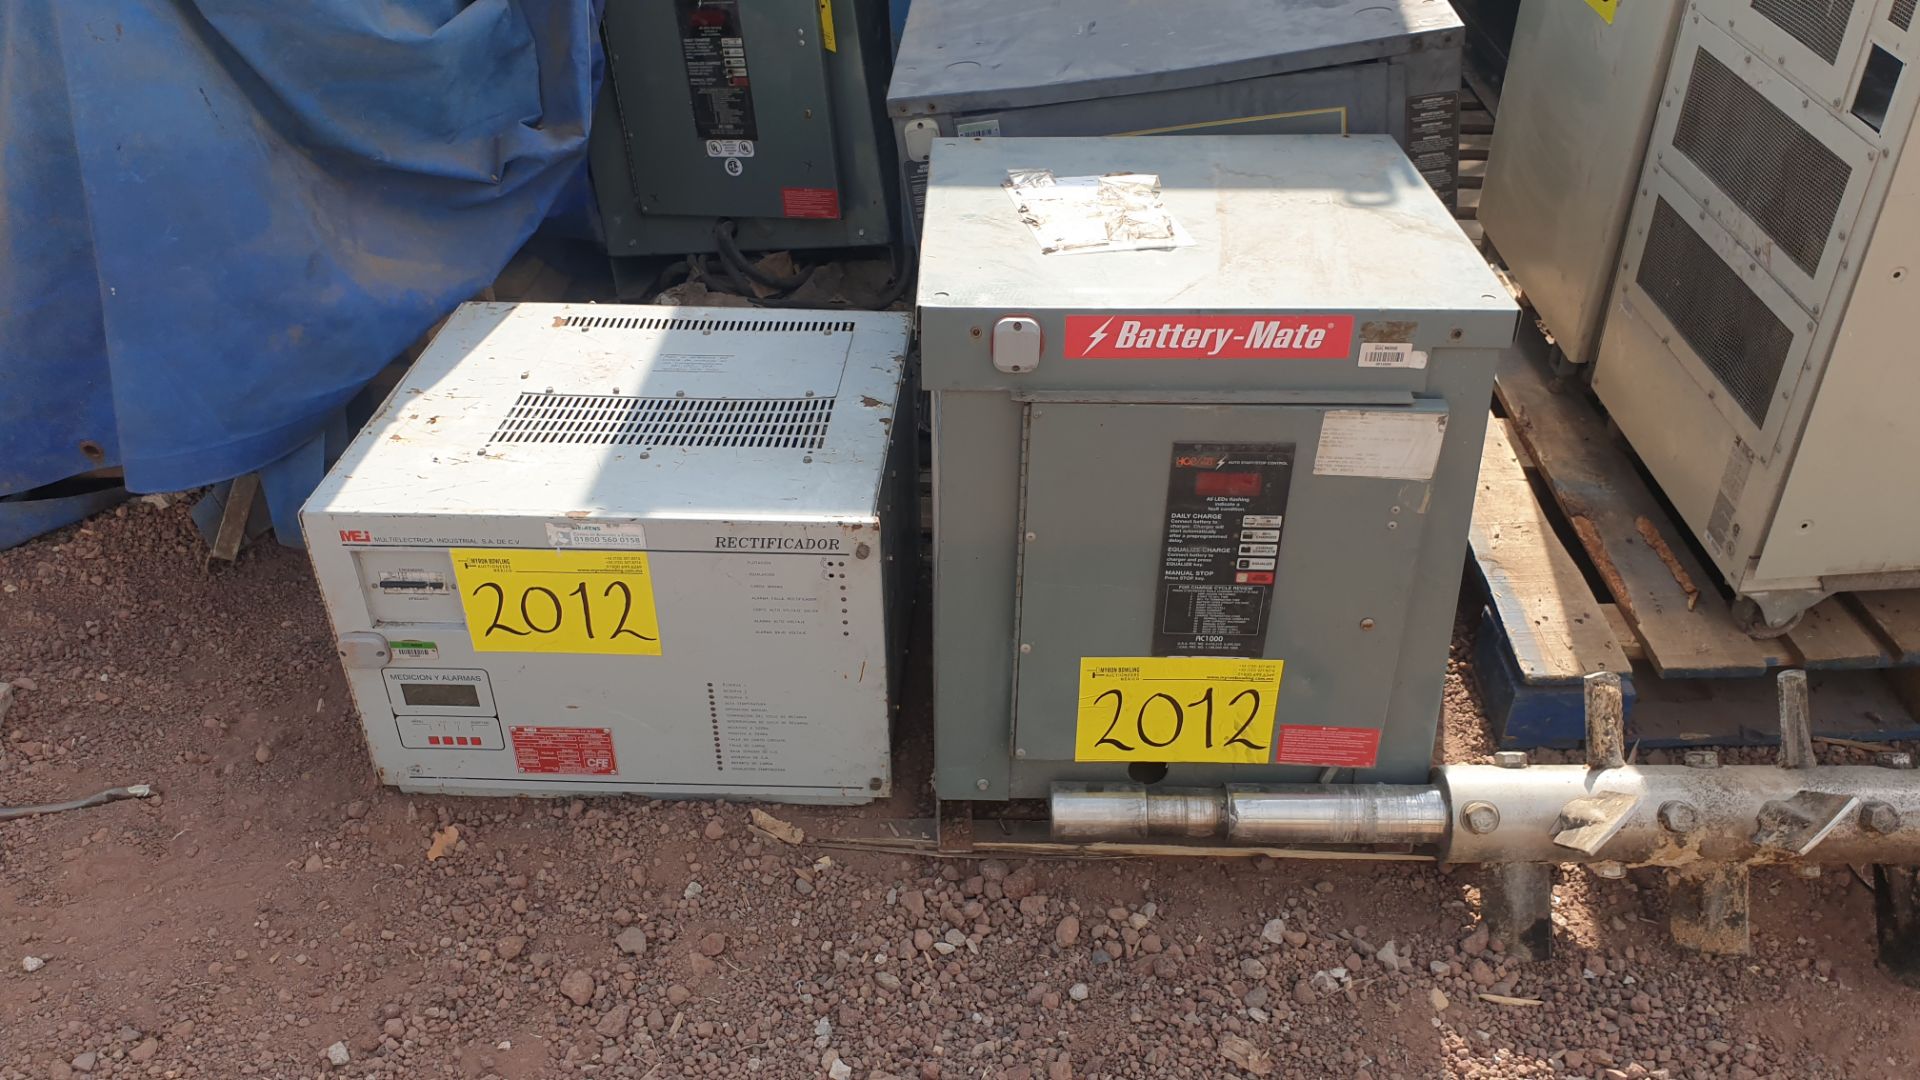 1 MEI Rectifier charger model KFT50130 N/S B14120459 220-440V year 2014